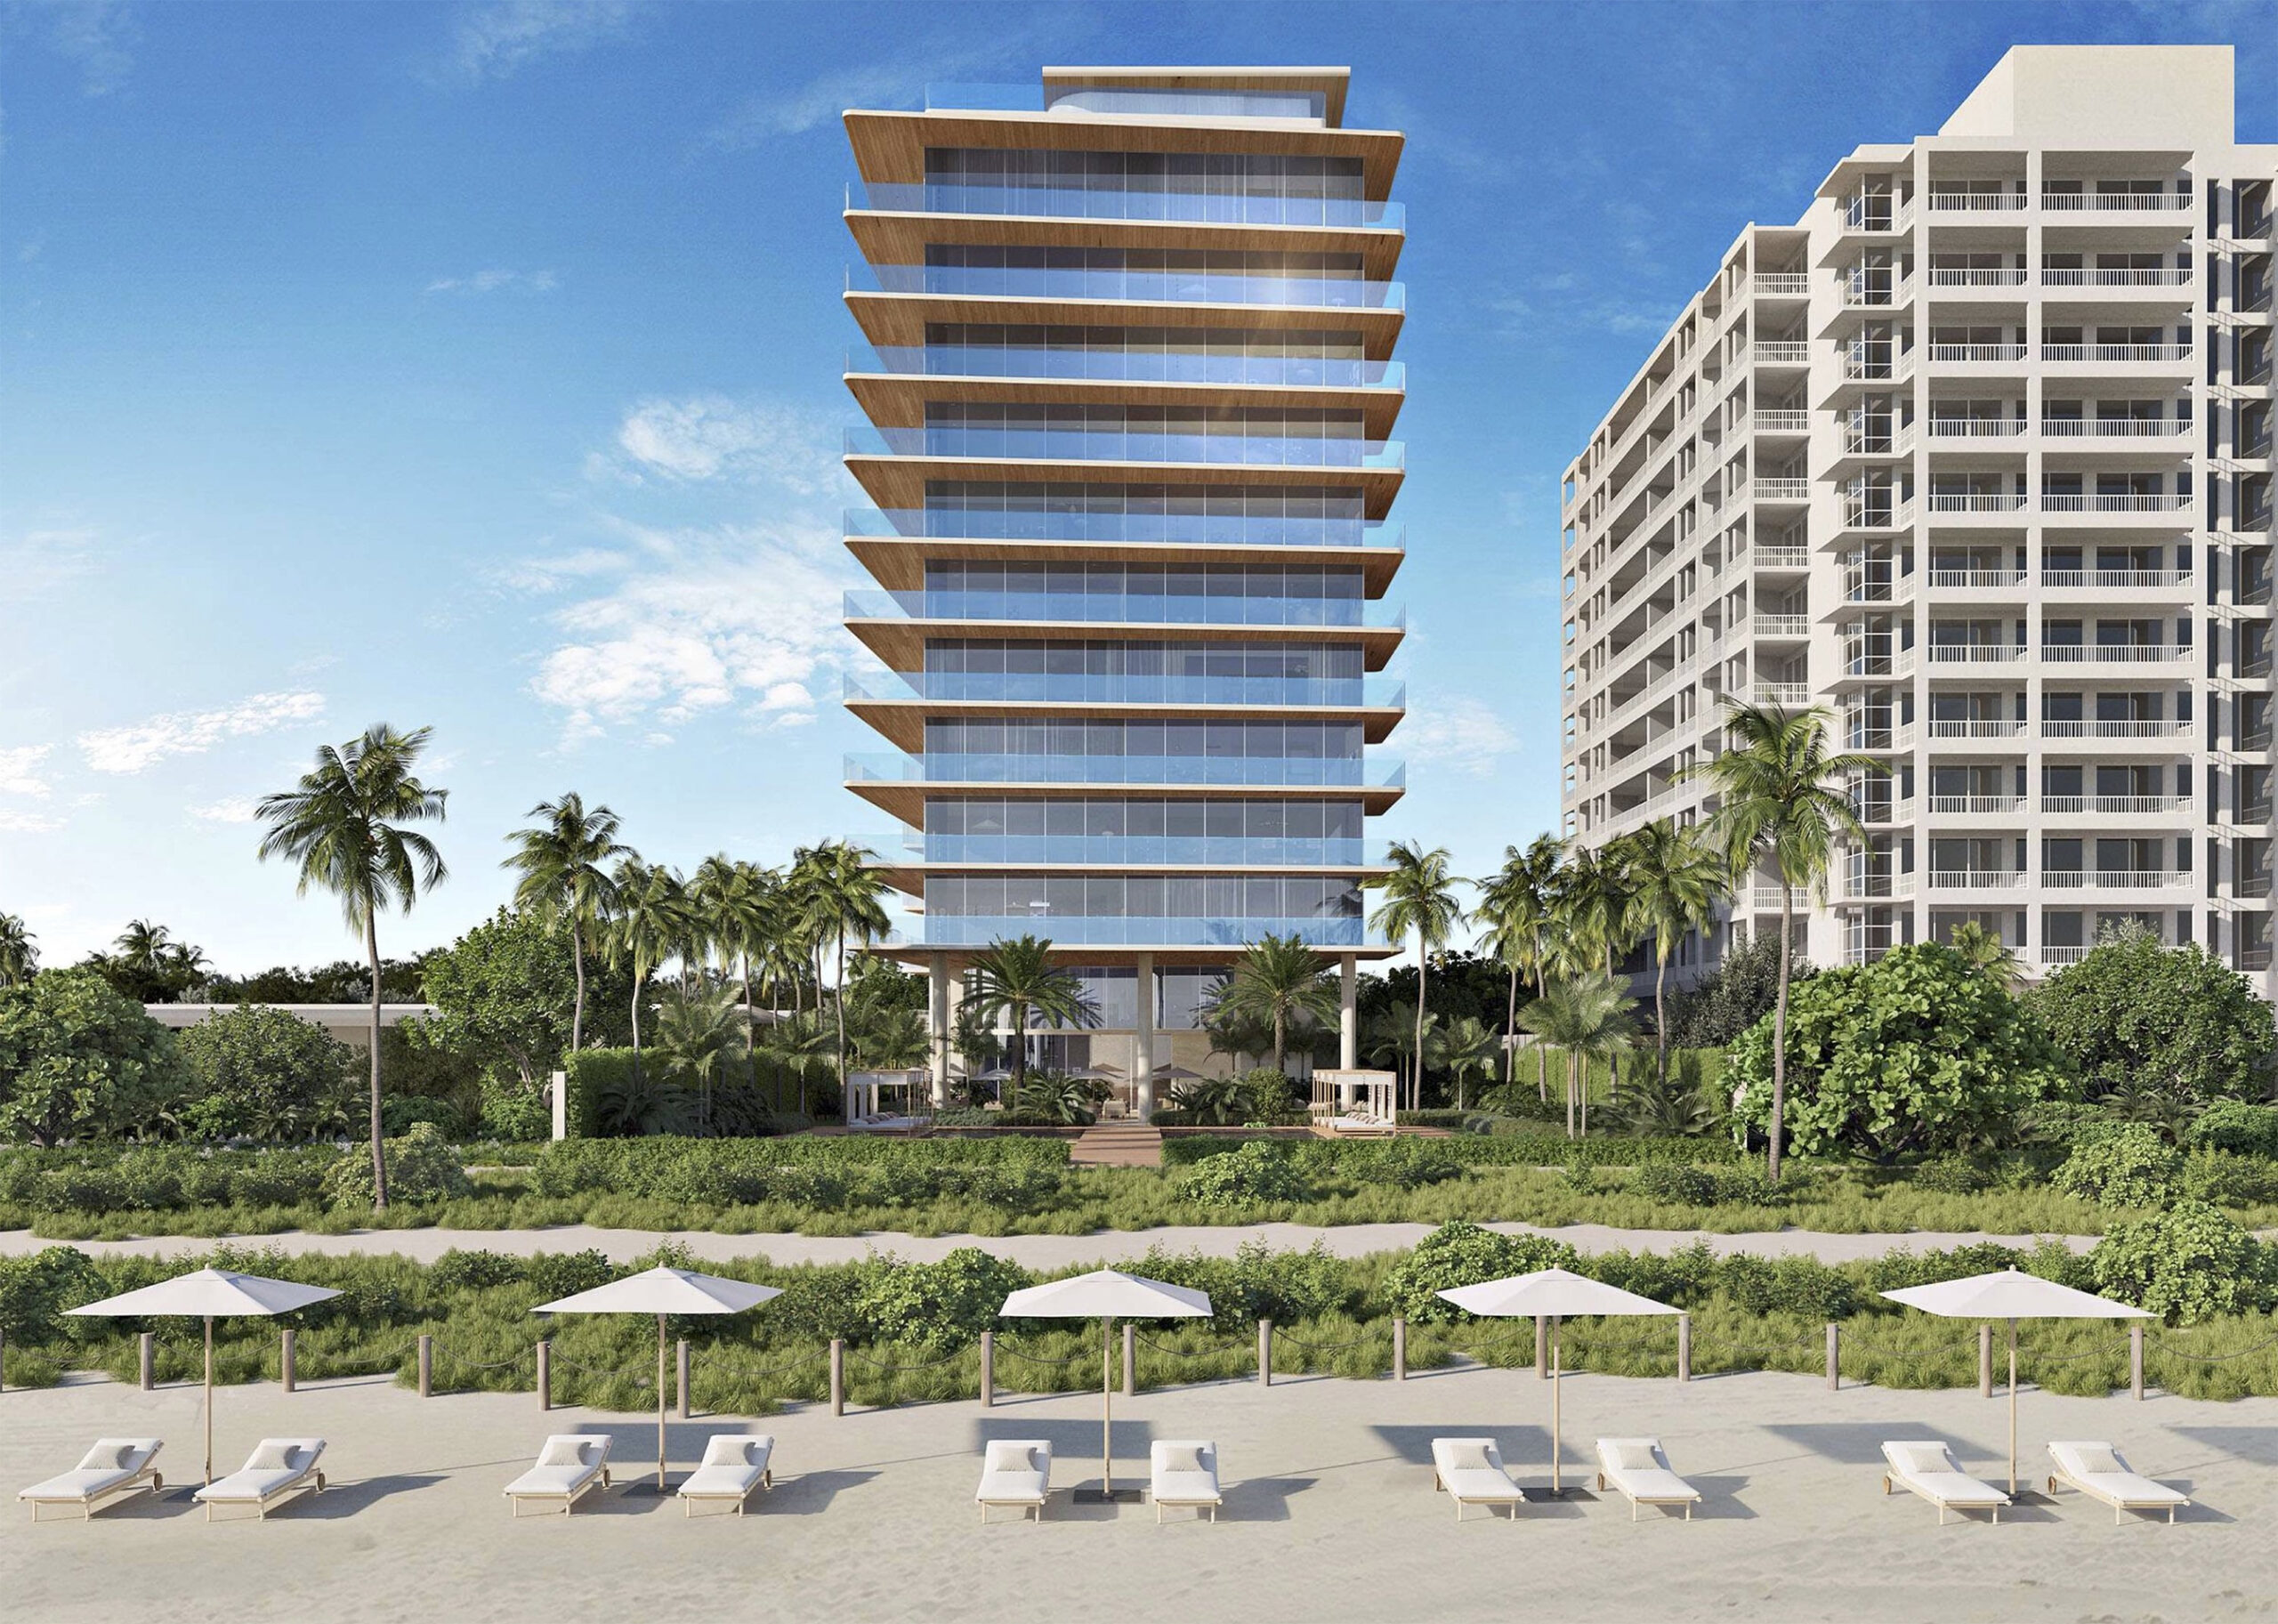 Multiplan Acquires Oceanfront Surfside Site for $64M, Plans 12-Story Luxury Condo Building